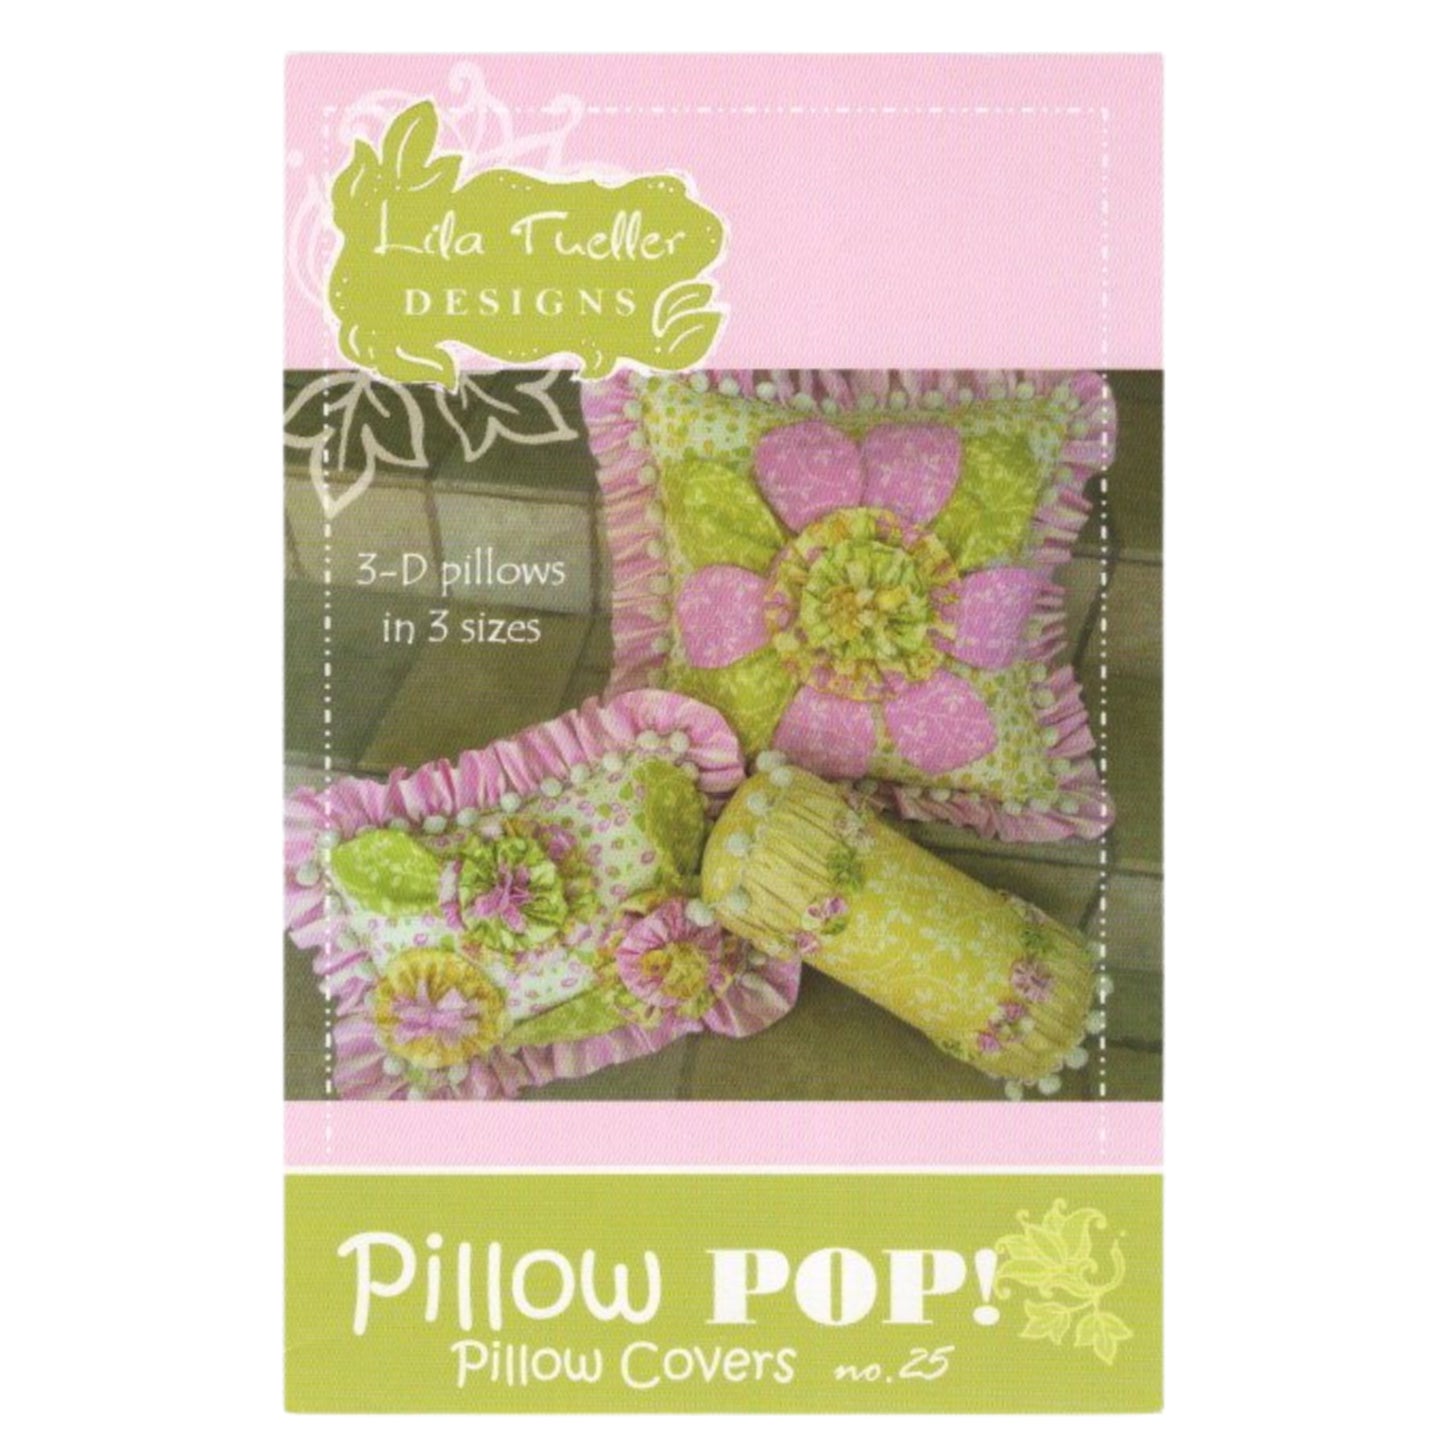 Pillow Pop! Pillow Covers Sewing Pattern - Nonna's Notions N' Sew On